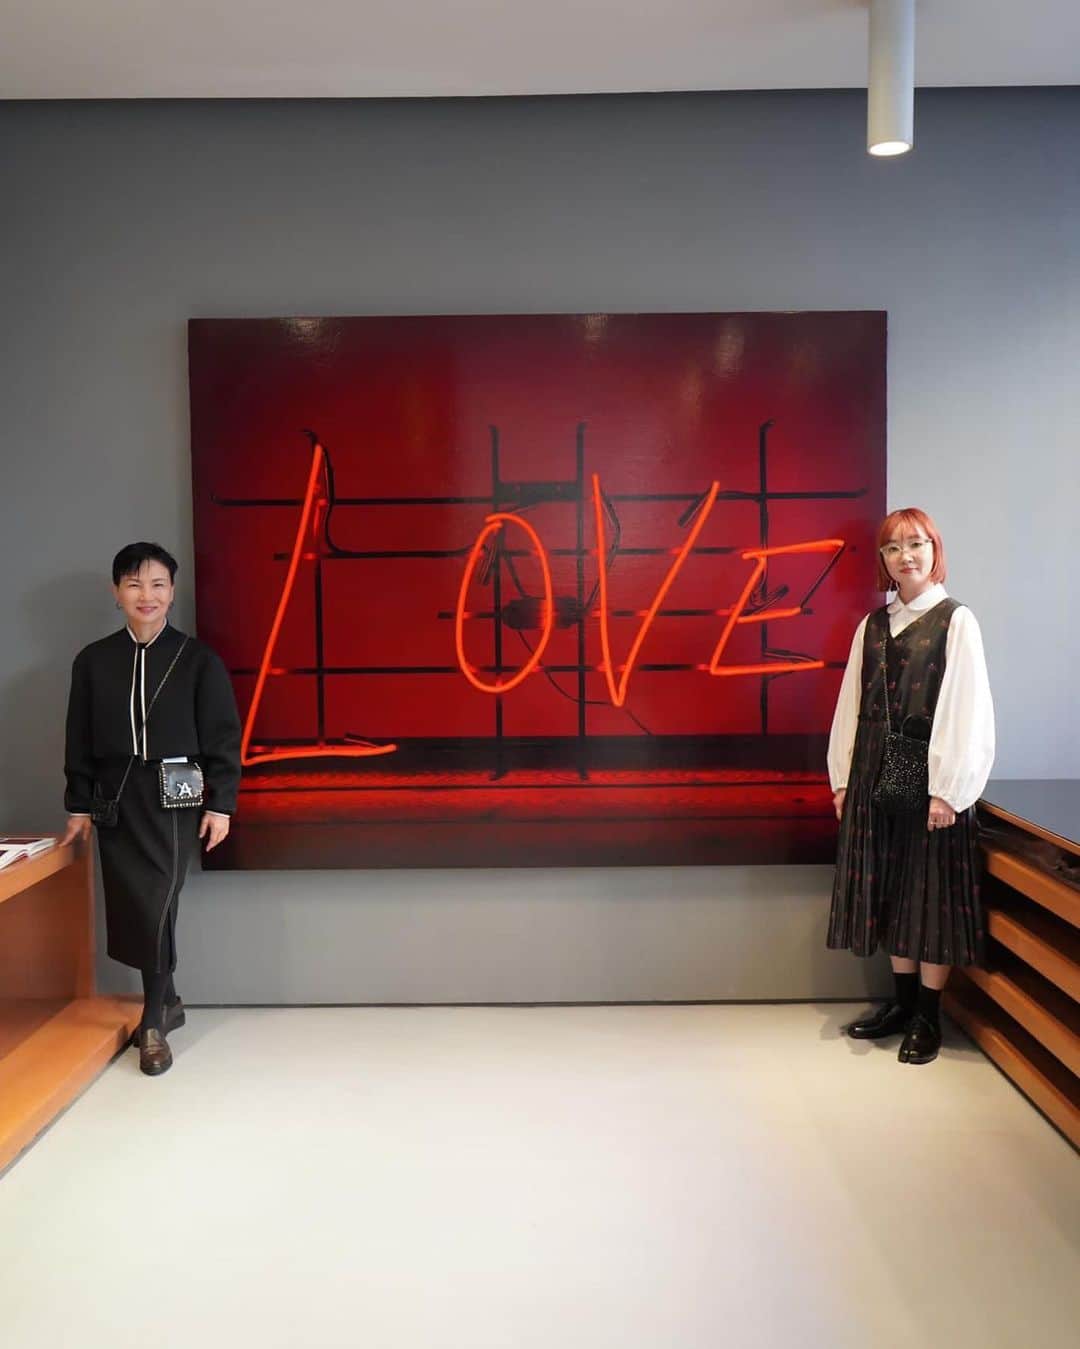 ANTEPRIMAのインスタグラム：「RE-EXPLORES THE MEANING OF LOVE  Love is one of ANTEPRIMA’s fundamental philosophies, to commemorate the 30 years of brand history, Izumi re-explored the true meaning of ‘LOVE’.  Always being a great supporter of upcoming artists, @izumianteprima introduced @namiyokoyama during 2023 Milano Design Week to showcase an art installation painted by this talented artist with the inspiration of “LOVE” calligraphed by Izumi.  Visit us to witness and embrace the one-of-a-kind art installation from now until 23rd April 2023.  #ANTEPRIMA30 #ANTEPRIMA #アンテプリマ #NamiYokoyama #LOVE #Neon #ModernArt #ContemporaryArt #NeonPainting #OilPainting #ArtExhibition」